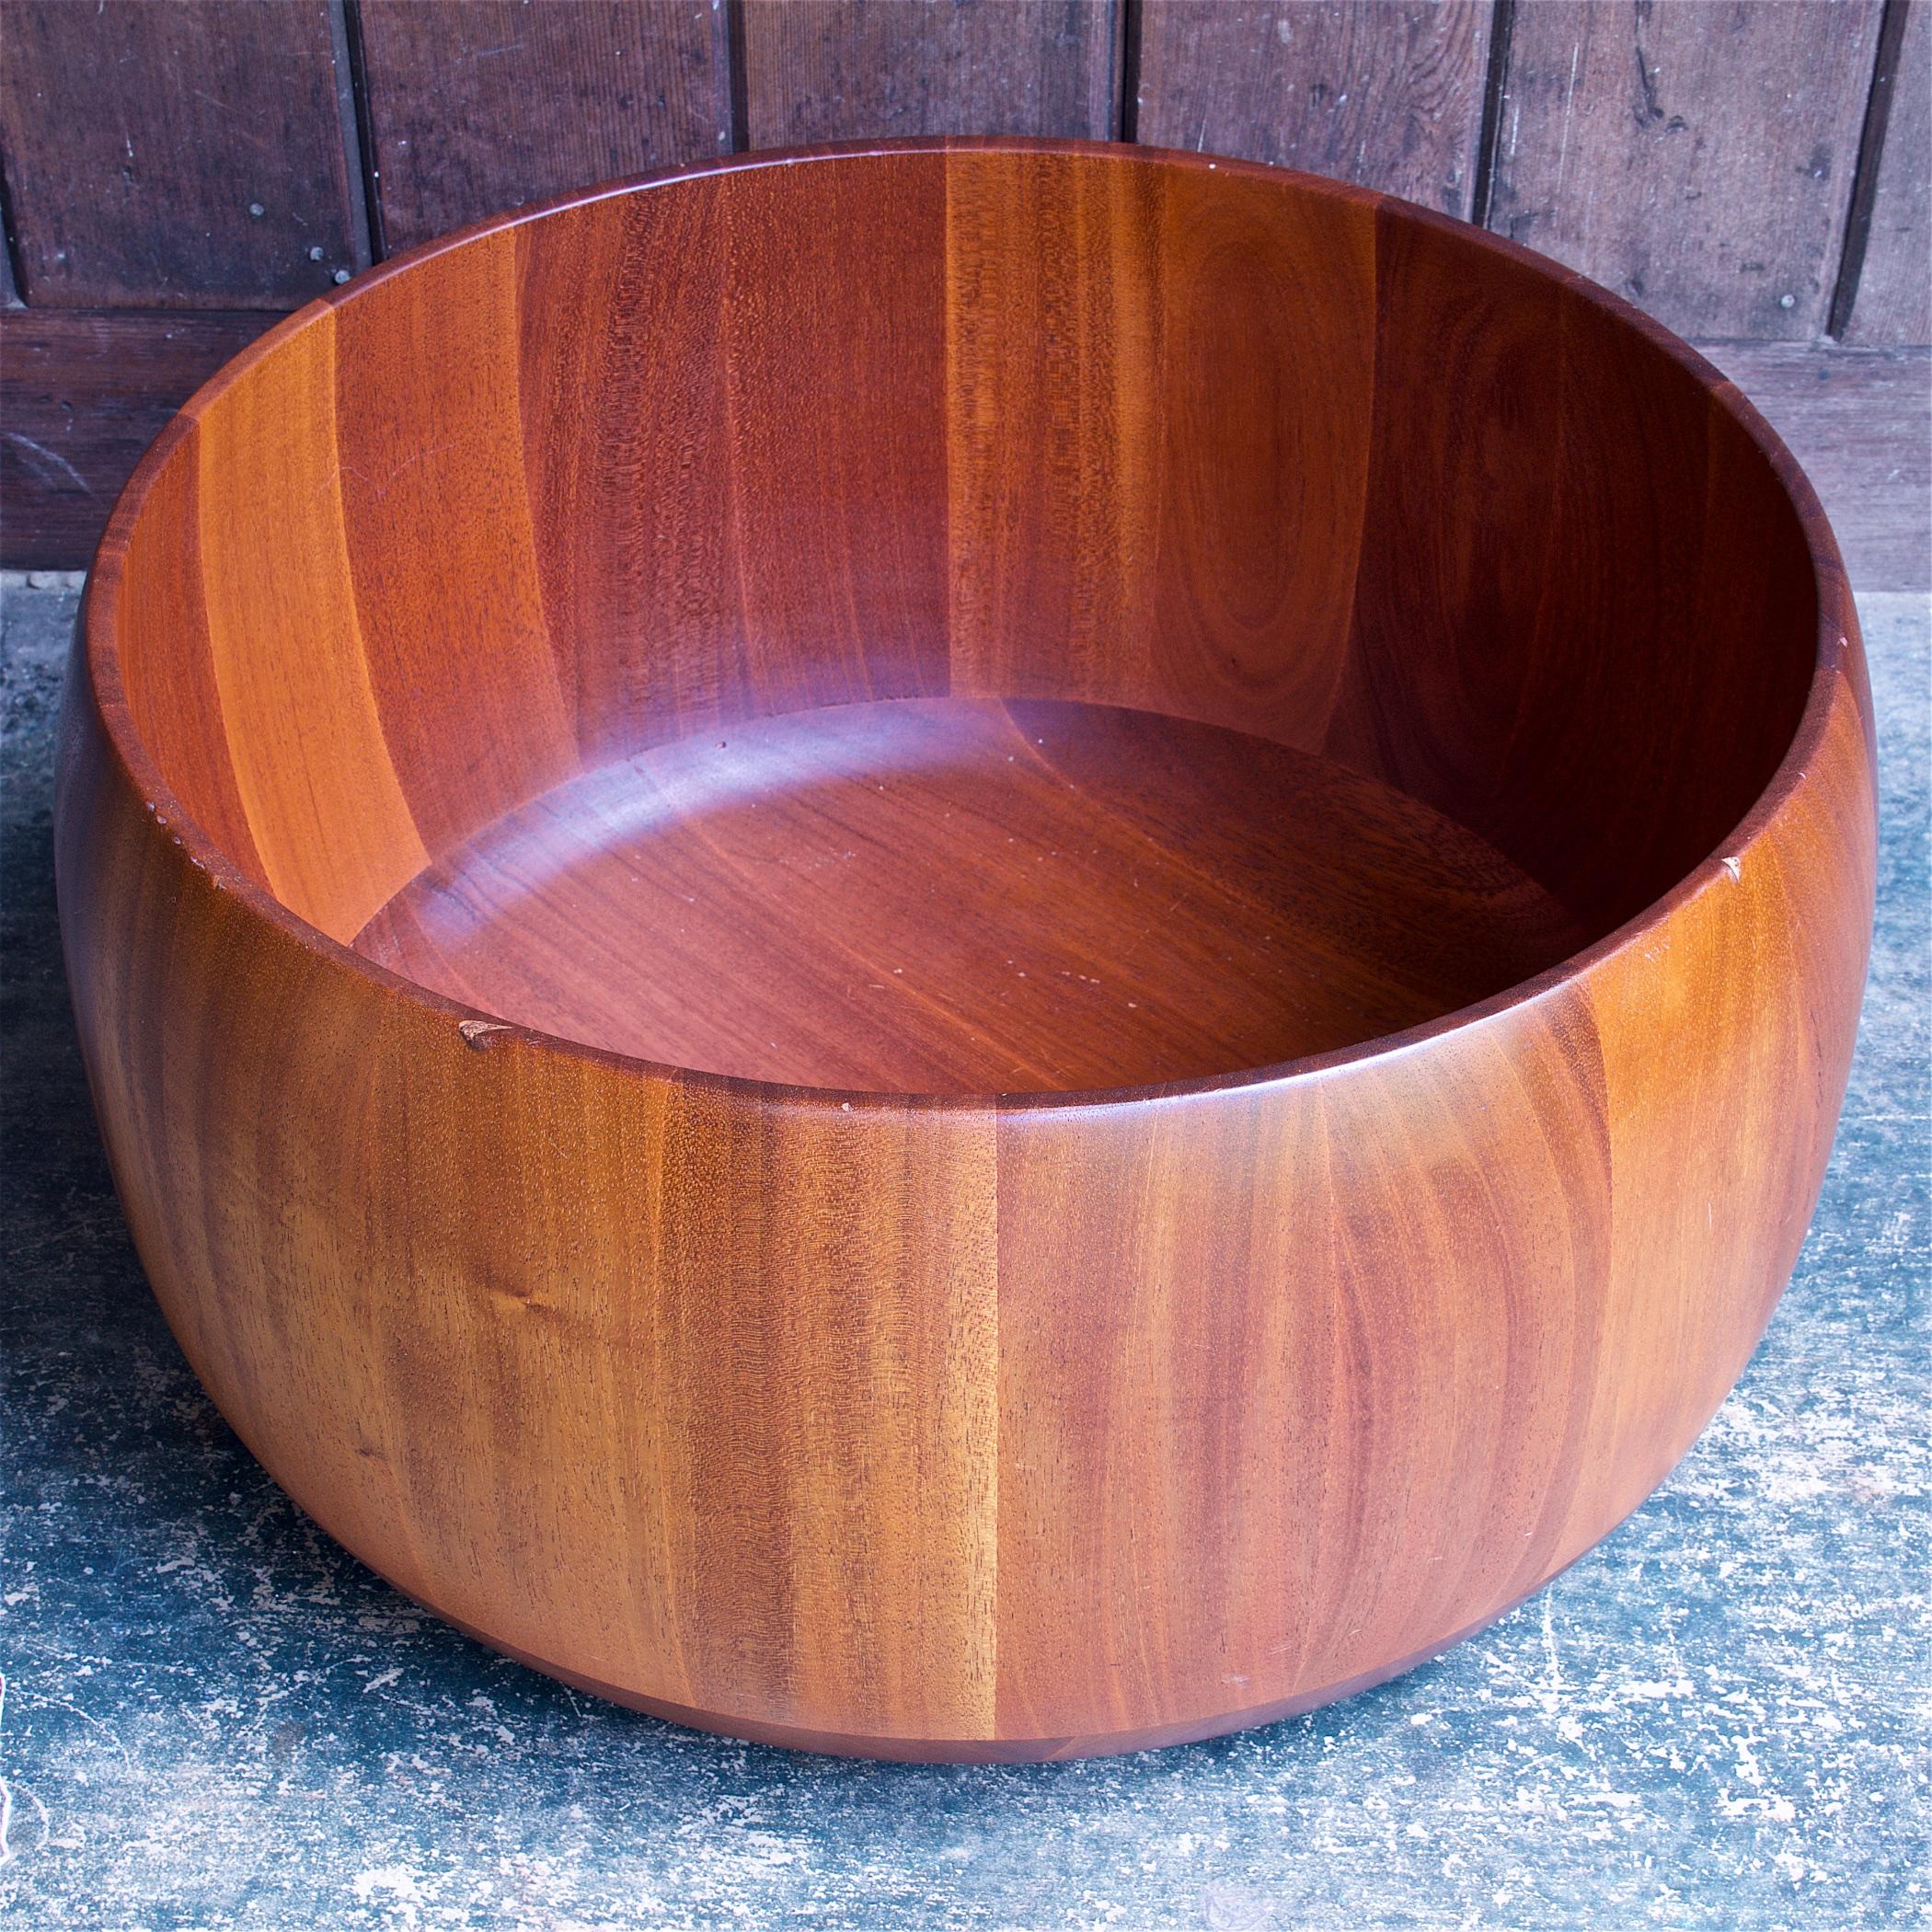 1970s Turned Wood Planter Mid-Century XL Bowl Craftsman John Crouse Wolcott Ny In Fair Condition For Sale In Hyattsville, MD